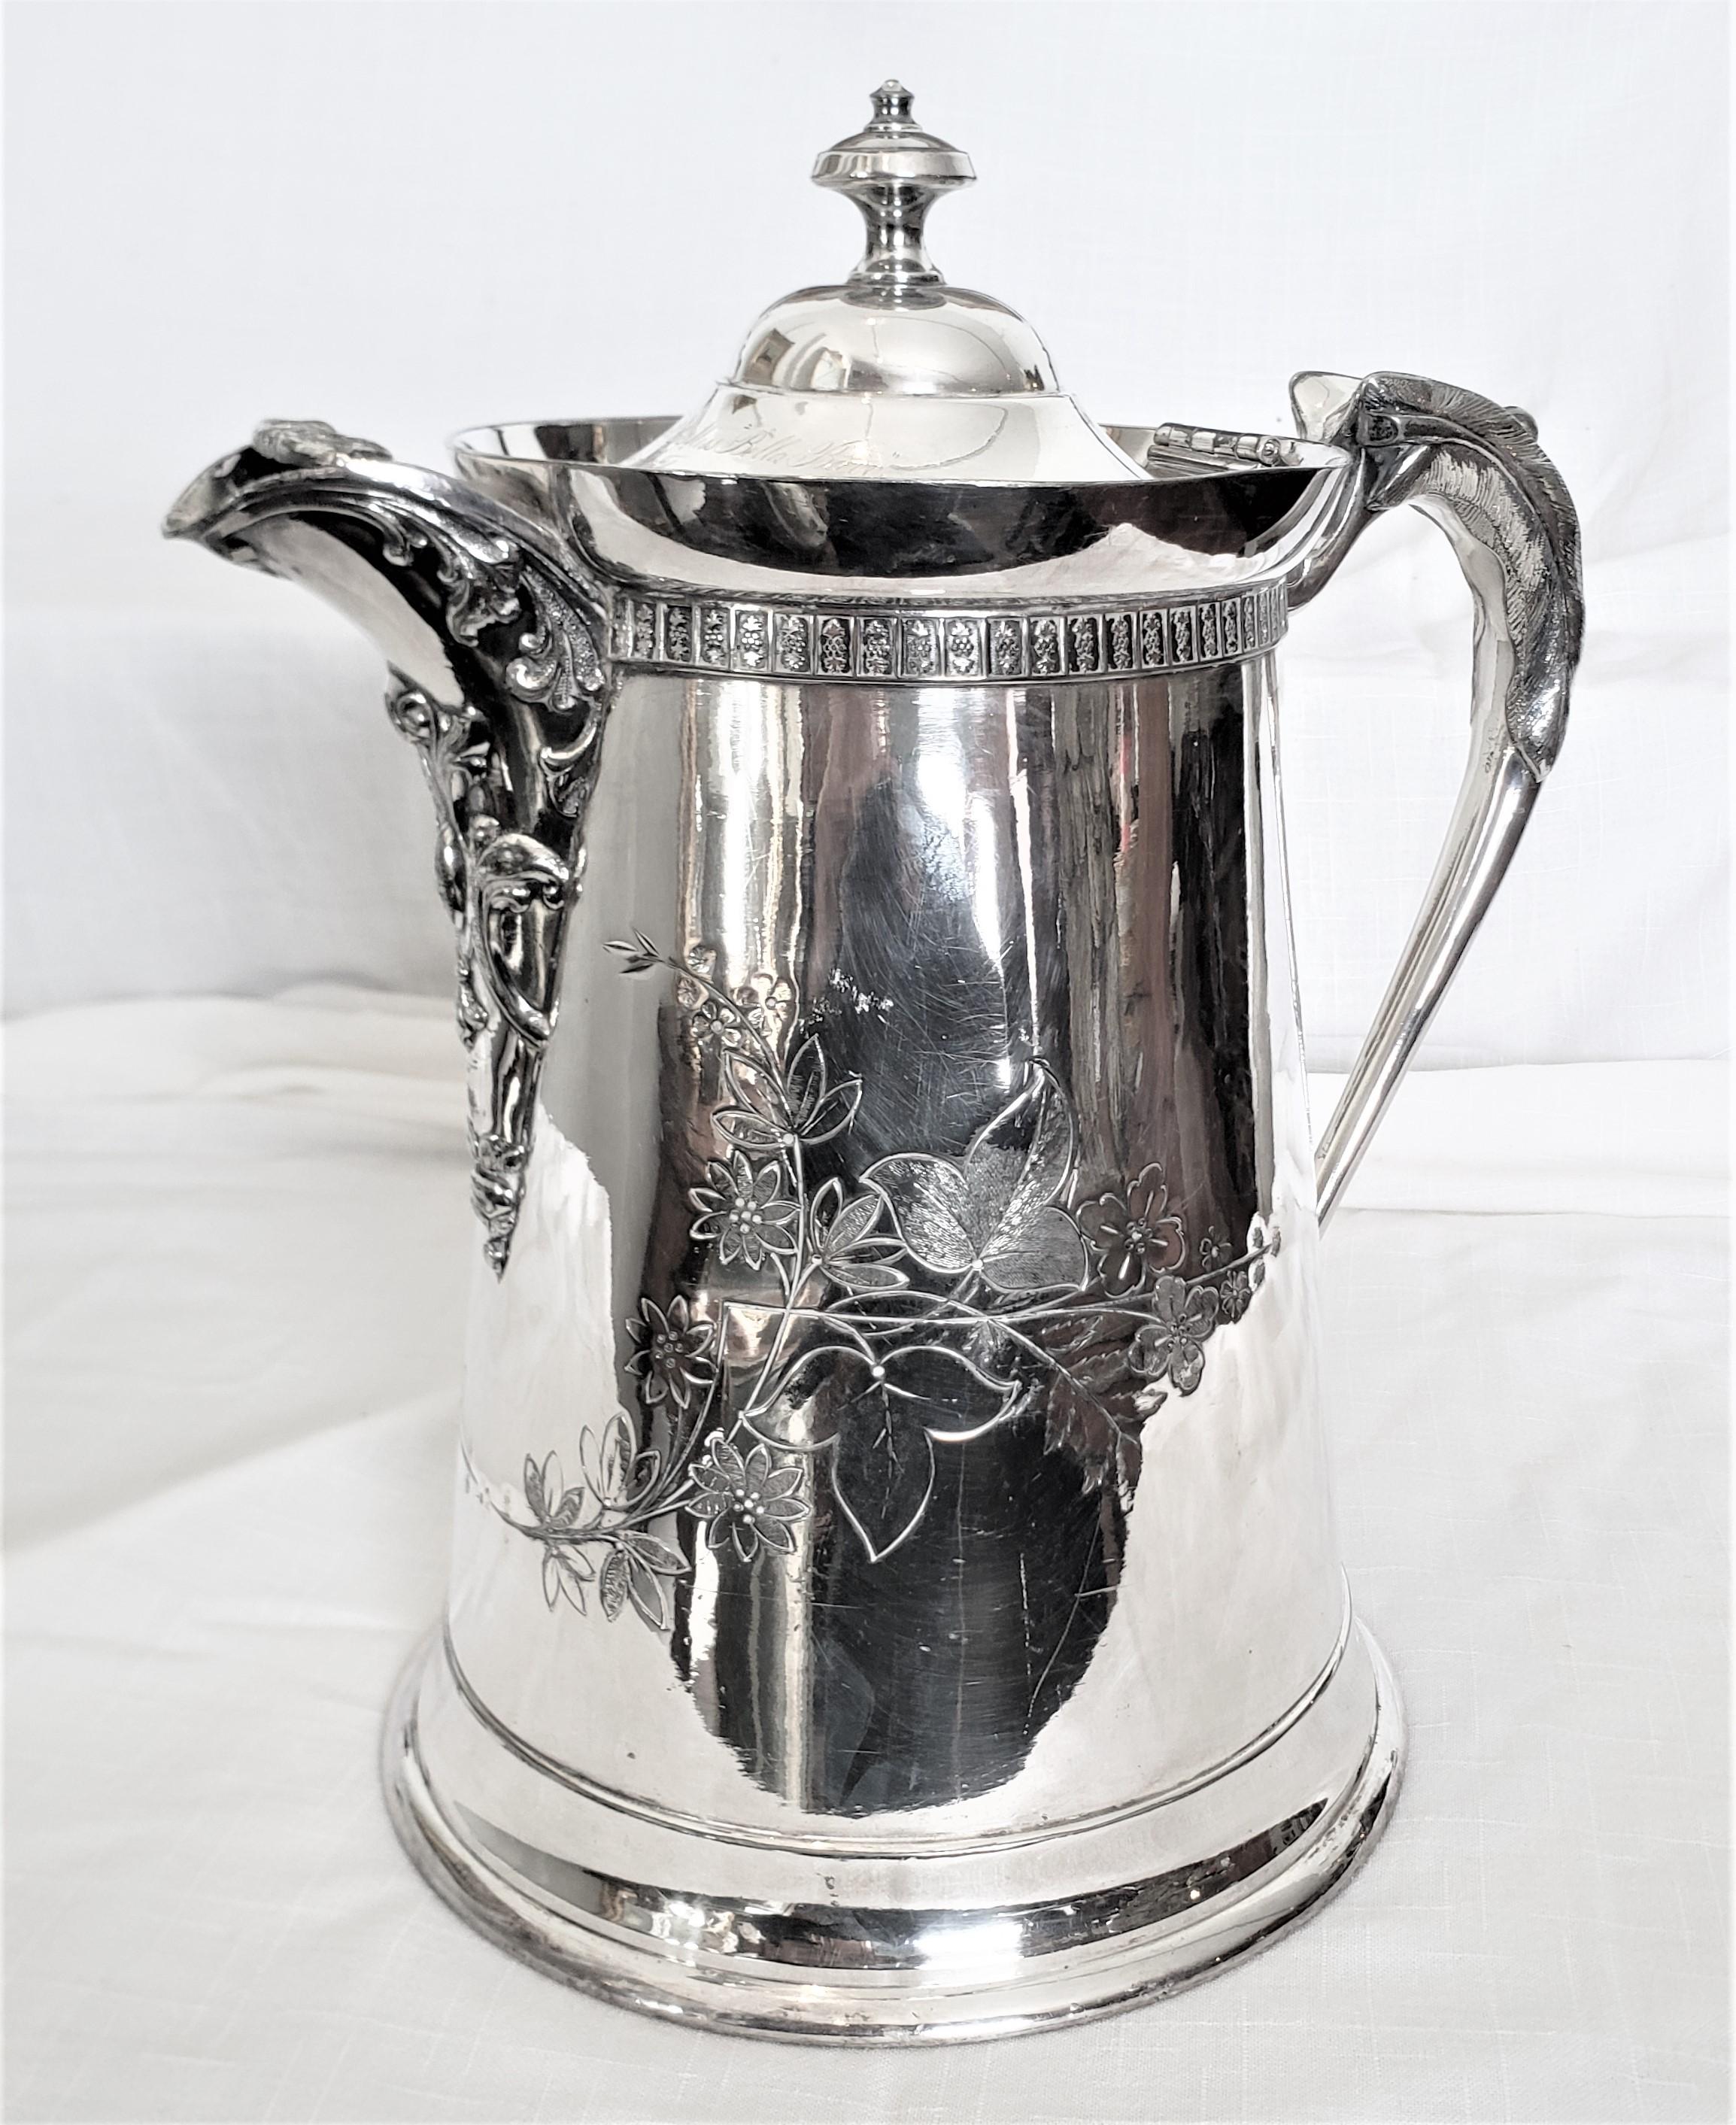 This antique silver plated hot water pitcher shows no maker's signature, but is presumed to have originated from the United States and dating to approximately 1875 and done in a period Victorian style. This insulated pitcher was a presentation piece